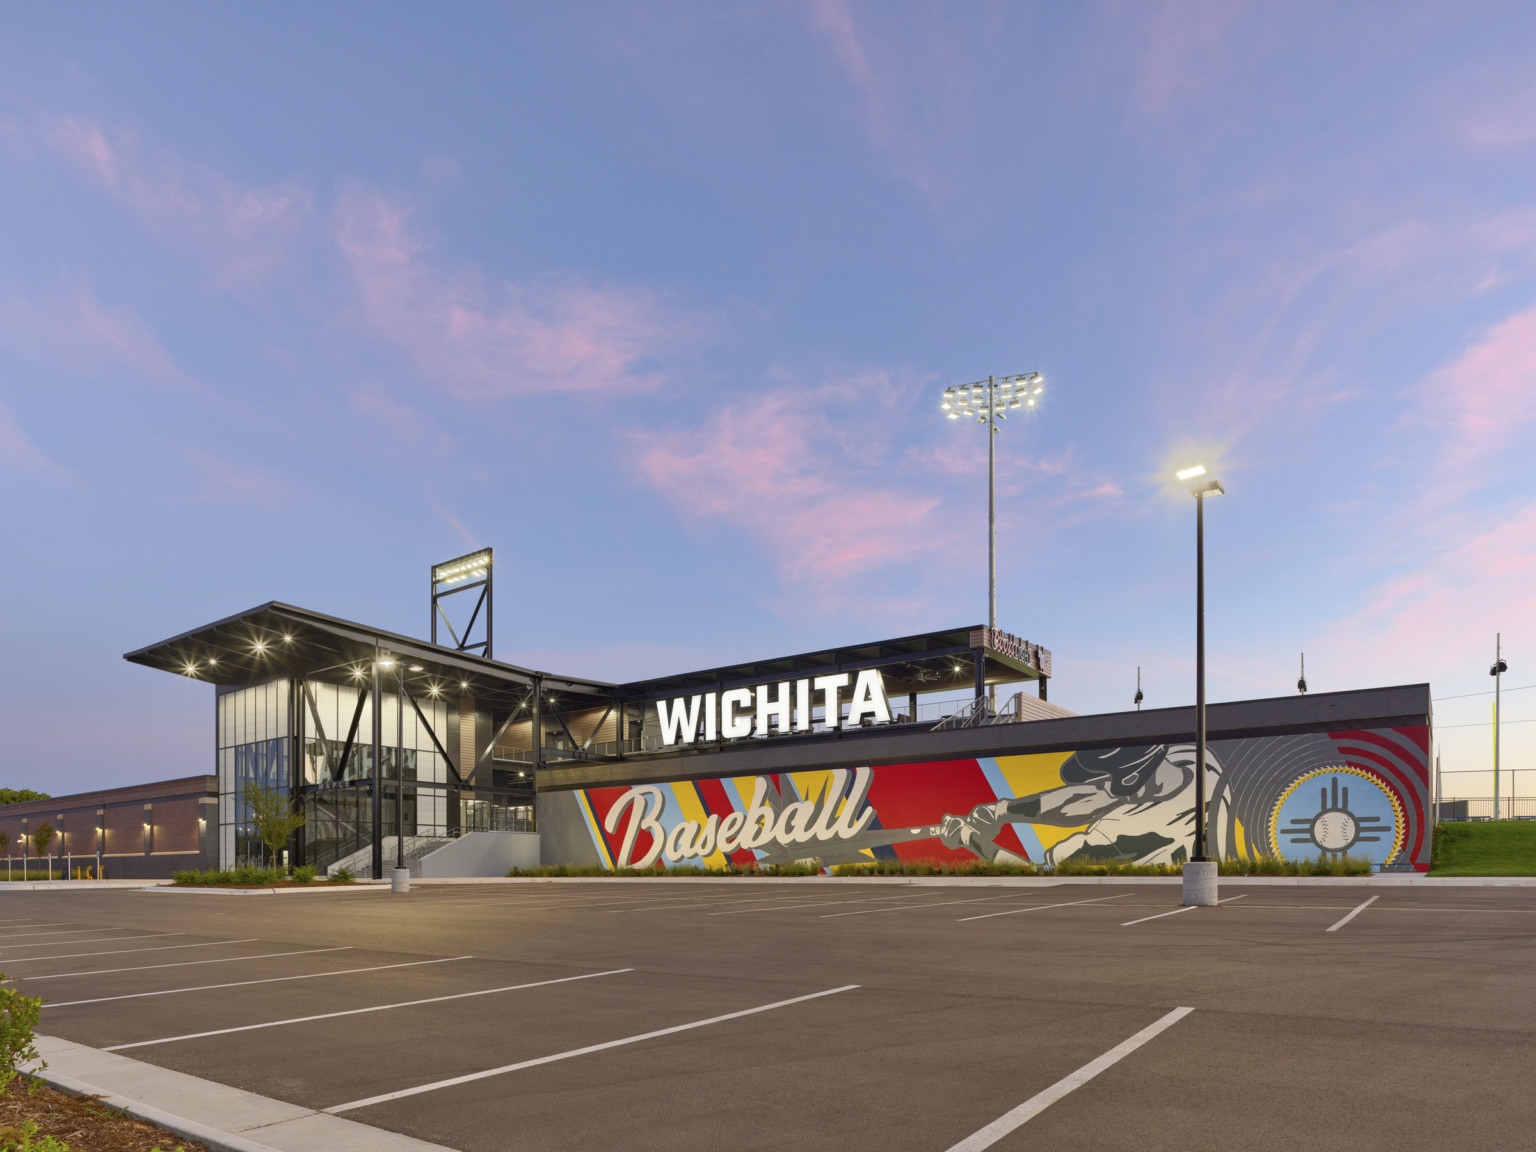 Illuminated Wichita Sign on 2nd floor above baseball mural, right of stadium entrance. Canopy over entry and roof patio right